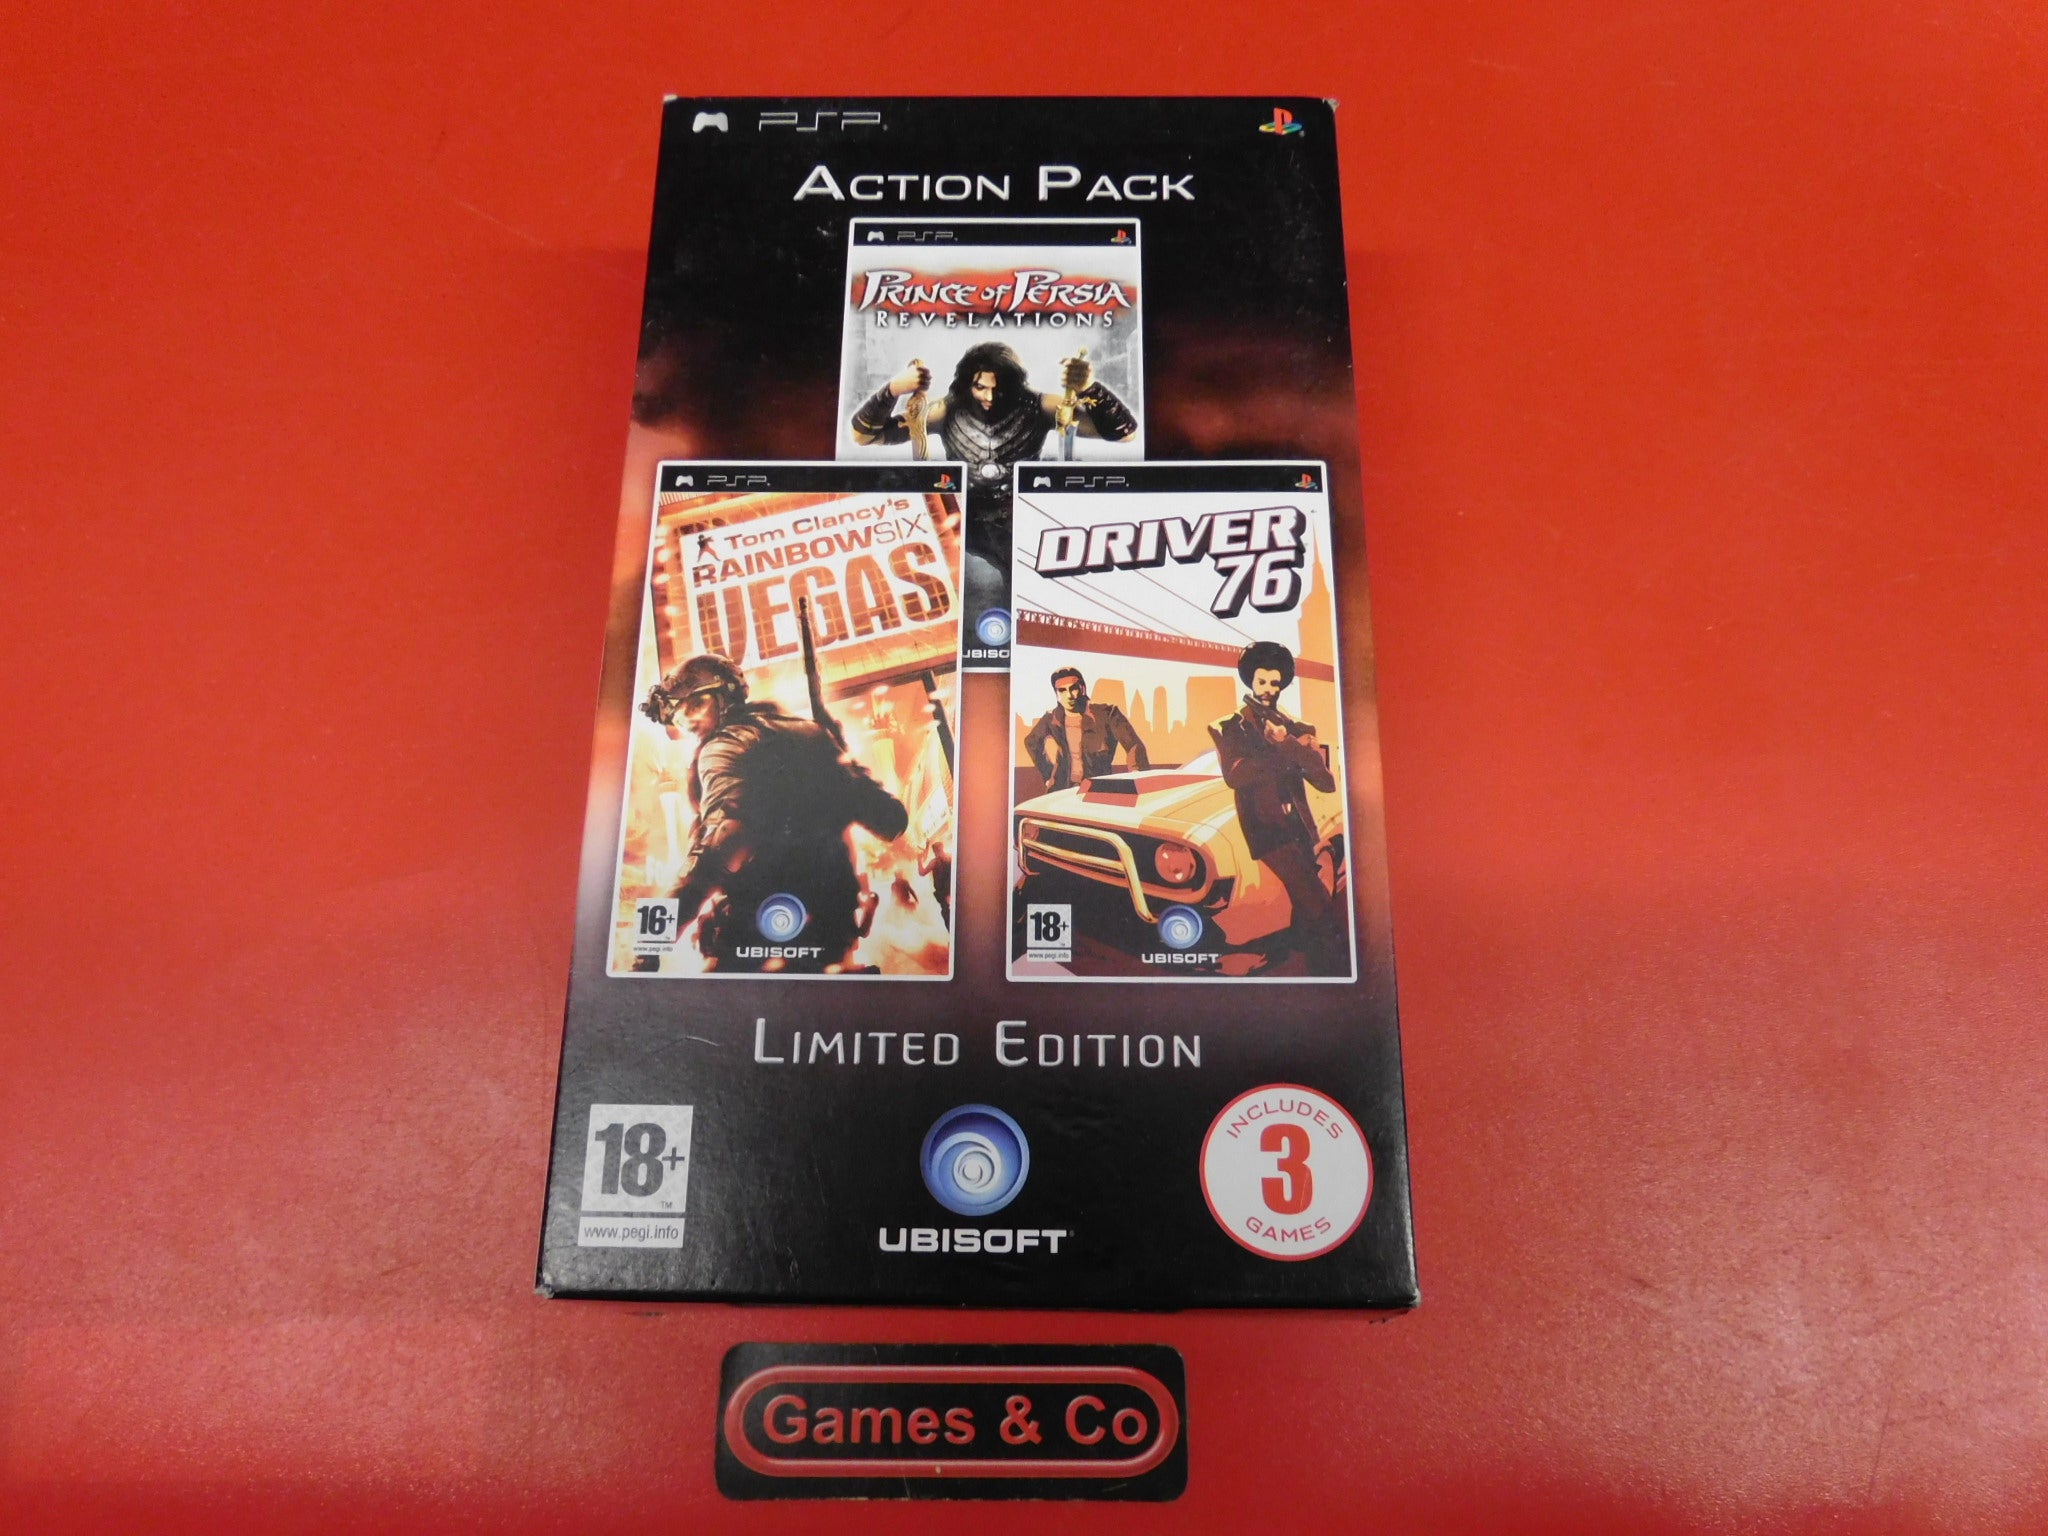 ACTION PACK LIMITED EDITION